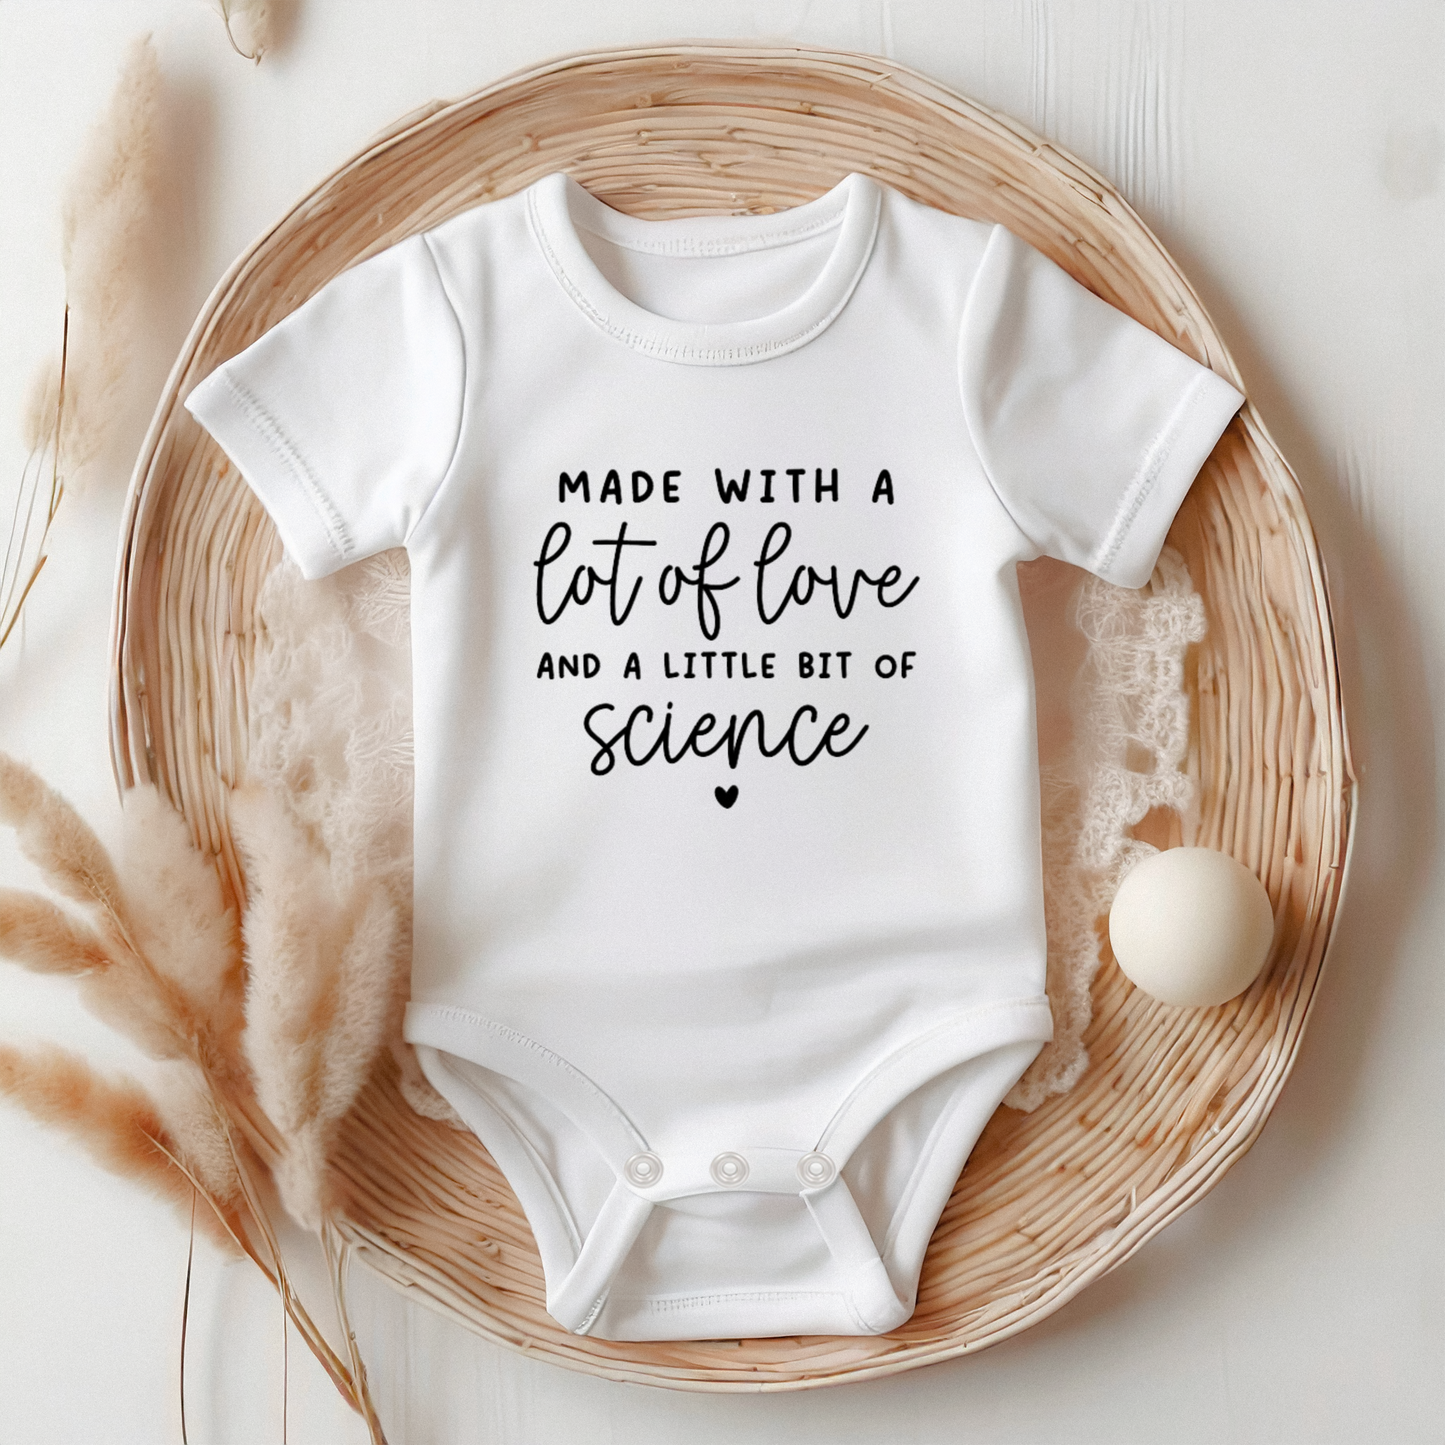 'Made with a lot of love & a little science' IVF Baby Announcement Onesie